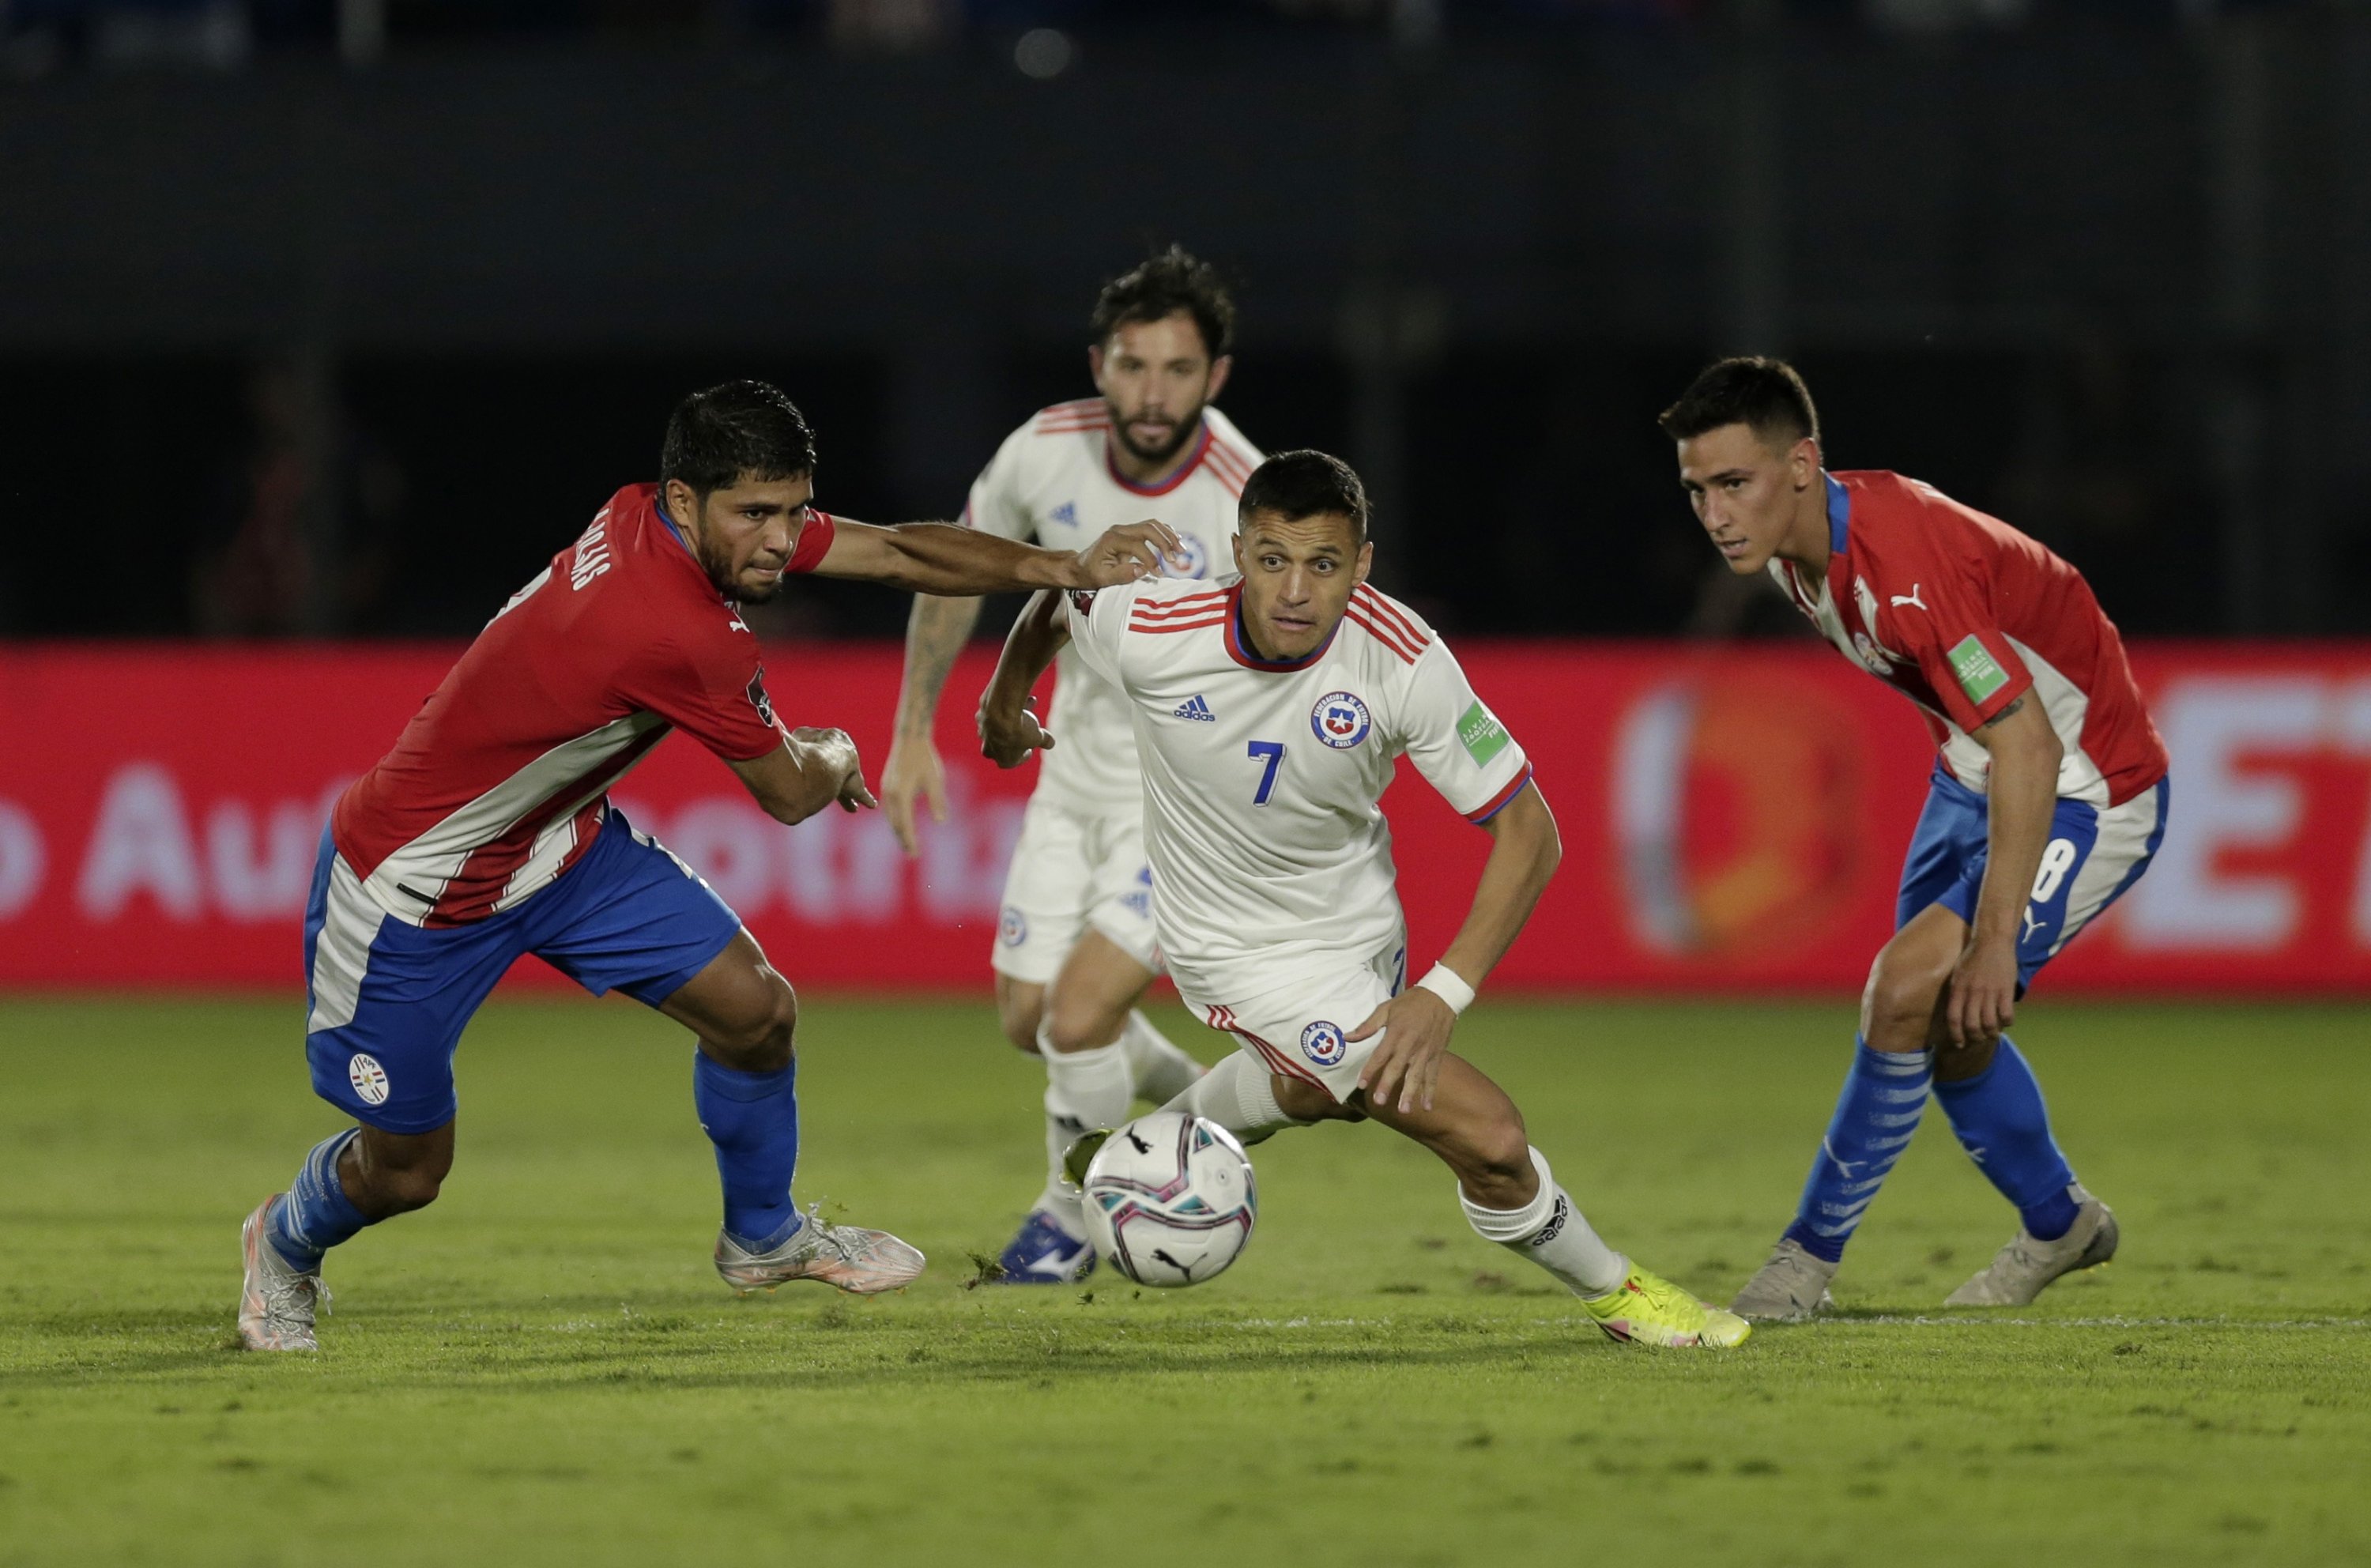 Chile's Alexis Sanchez in action during a Qatar 2022 World Cup qualifier against Paraguay in Asuncion, Paraguay, Nov. 11, 2021.